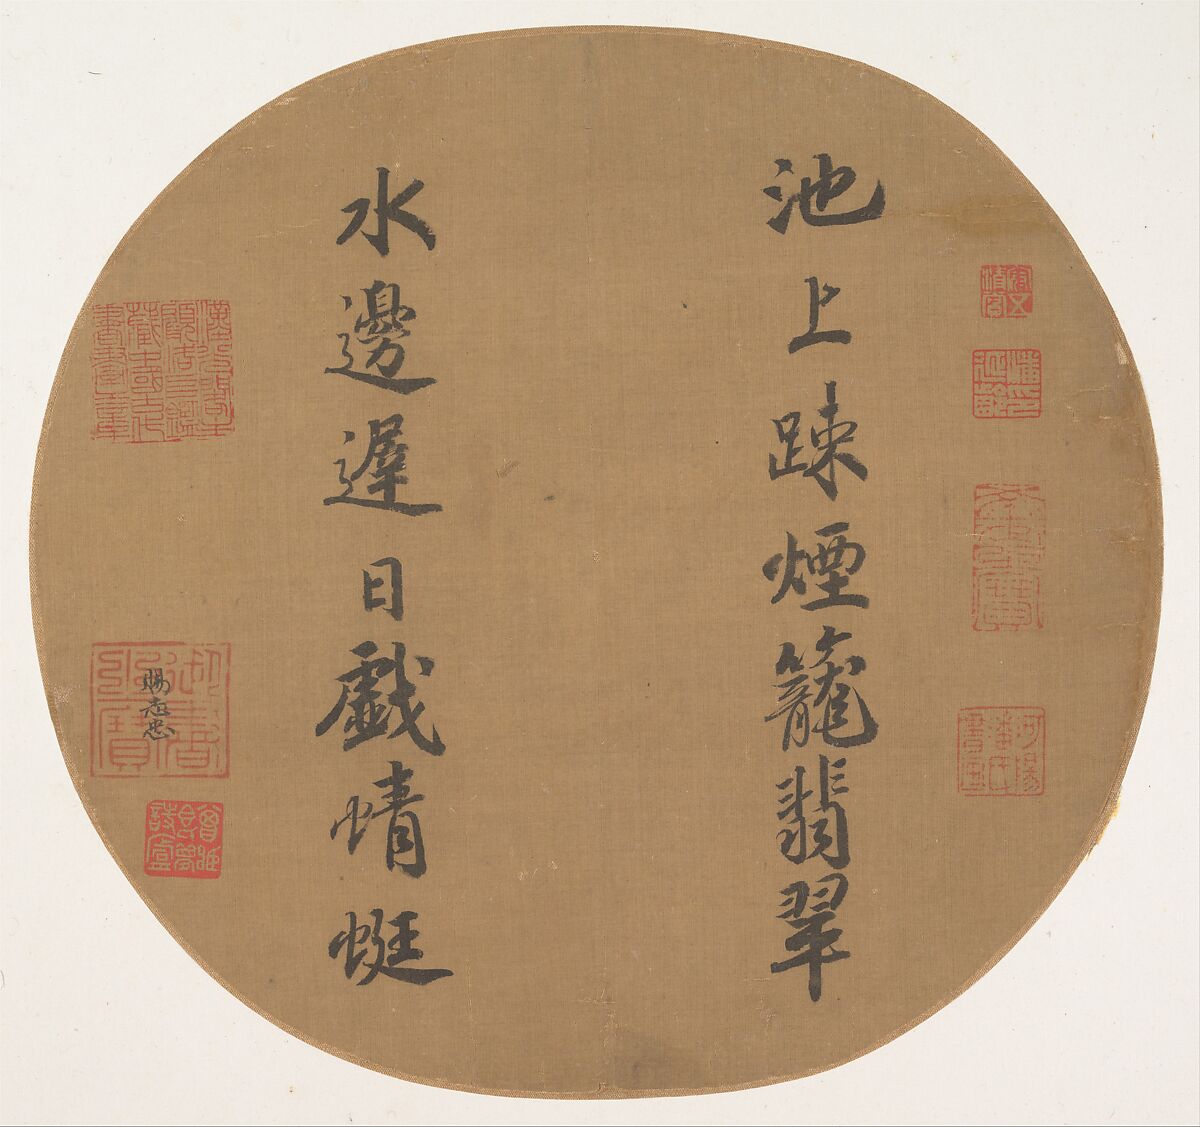 Couplet on pond scenery, Attributed to Emperor Xiaozong (Chinese, 1127–1194; r. 1163–89), Fan mounted as an album leaf; ink on silk, China 